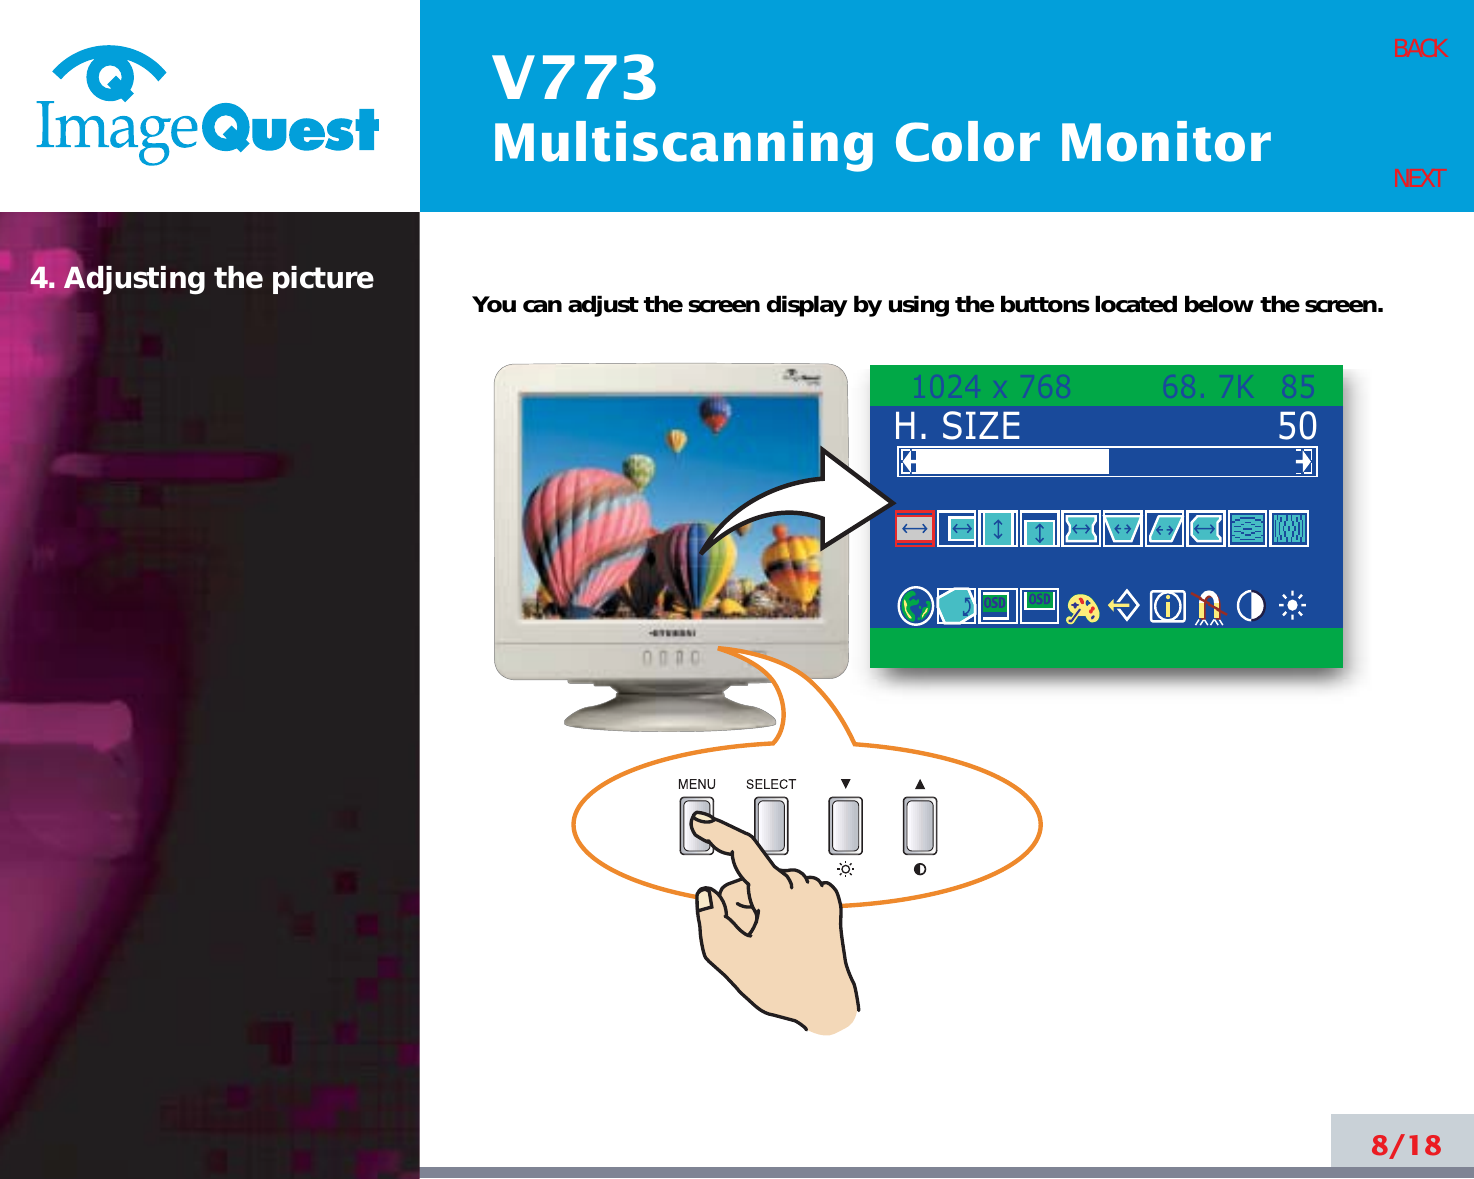 V773Multiscanning Color Monitor8/18BACKNEXT4. Adjusting the picture You can adjust the screen display by using the buttons located below the screen.H. SIZE1024 x 768         68. 7K    8550